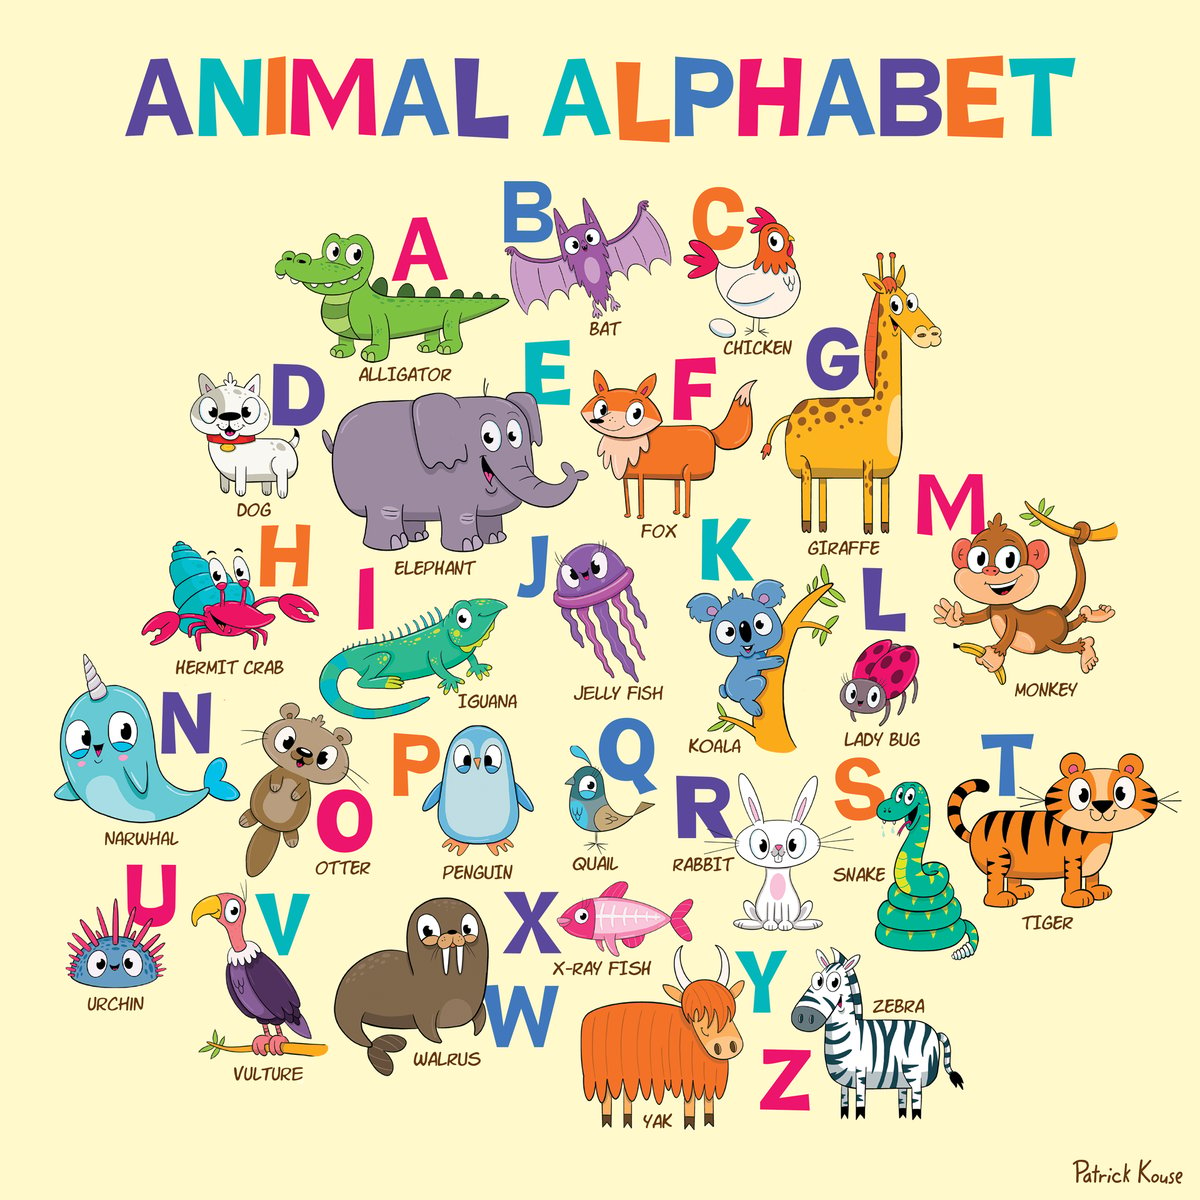 Is There An Animal That Starts With Every Letter Of The Alphabet